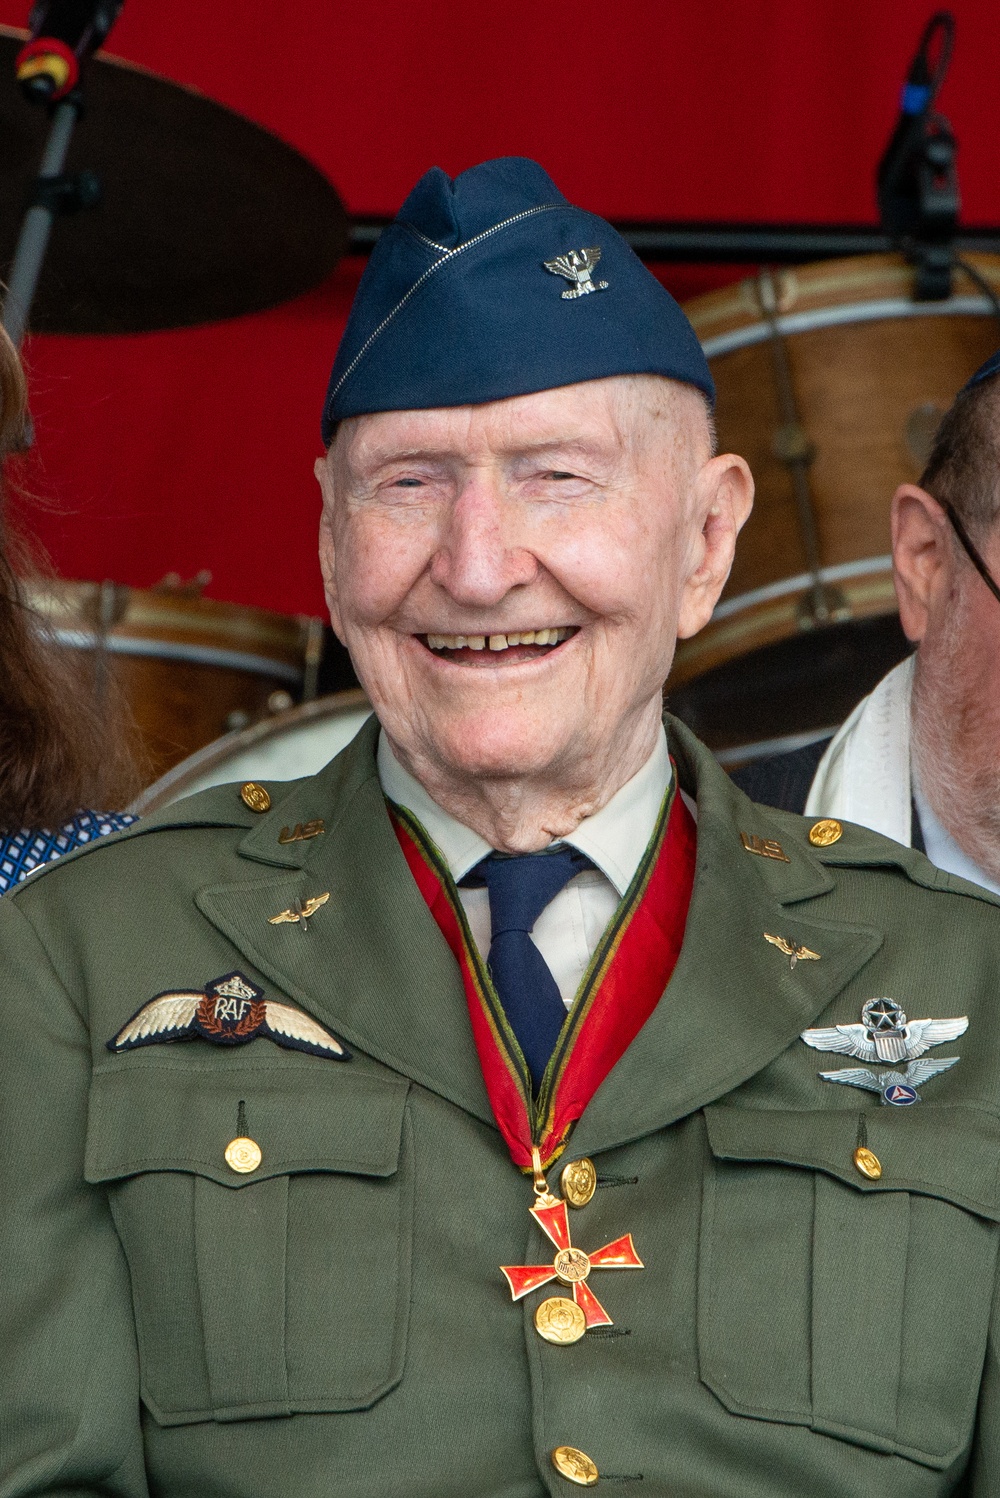 Colonel Gail Seymour &quot;Hal&quot; Halvorsen (Retired) &quot;The Candy Bomber&quot; participates in a ceremony commemorating the Berlin Airlift.